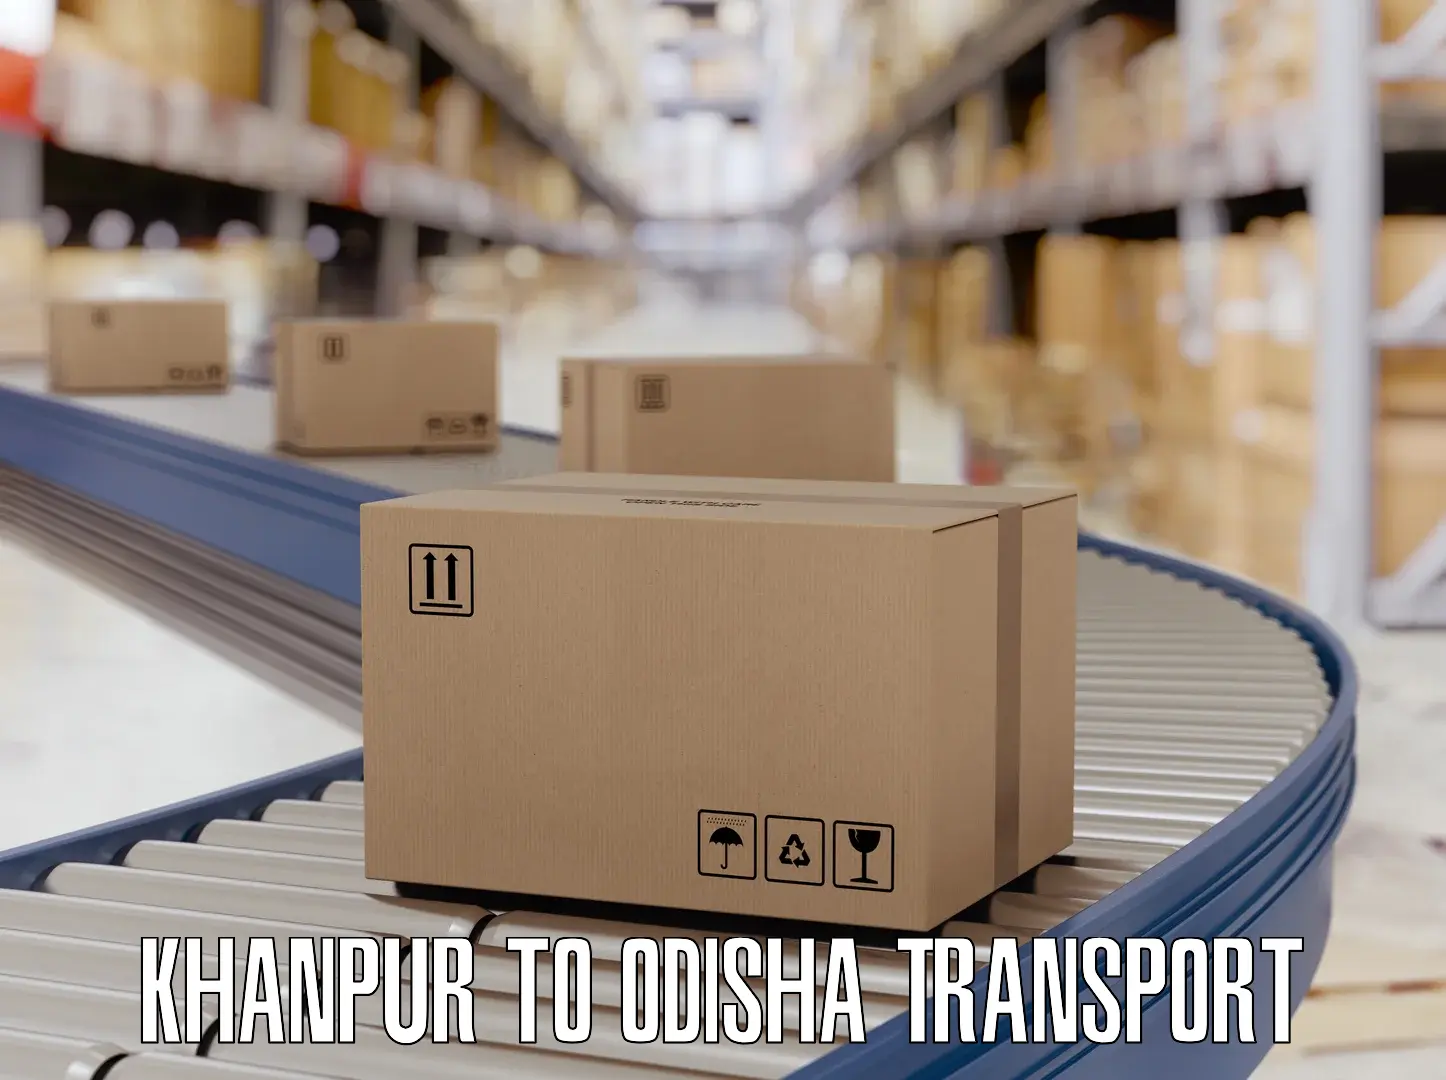 Air freight transport services Khanpur to Odisha